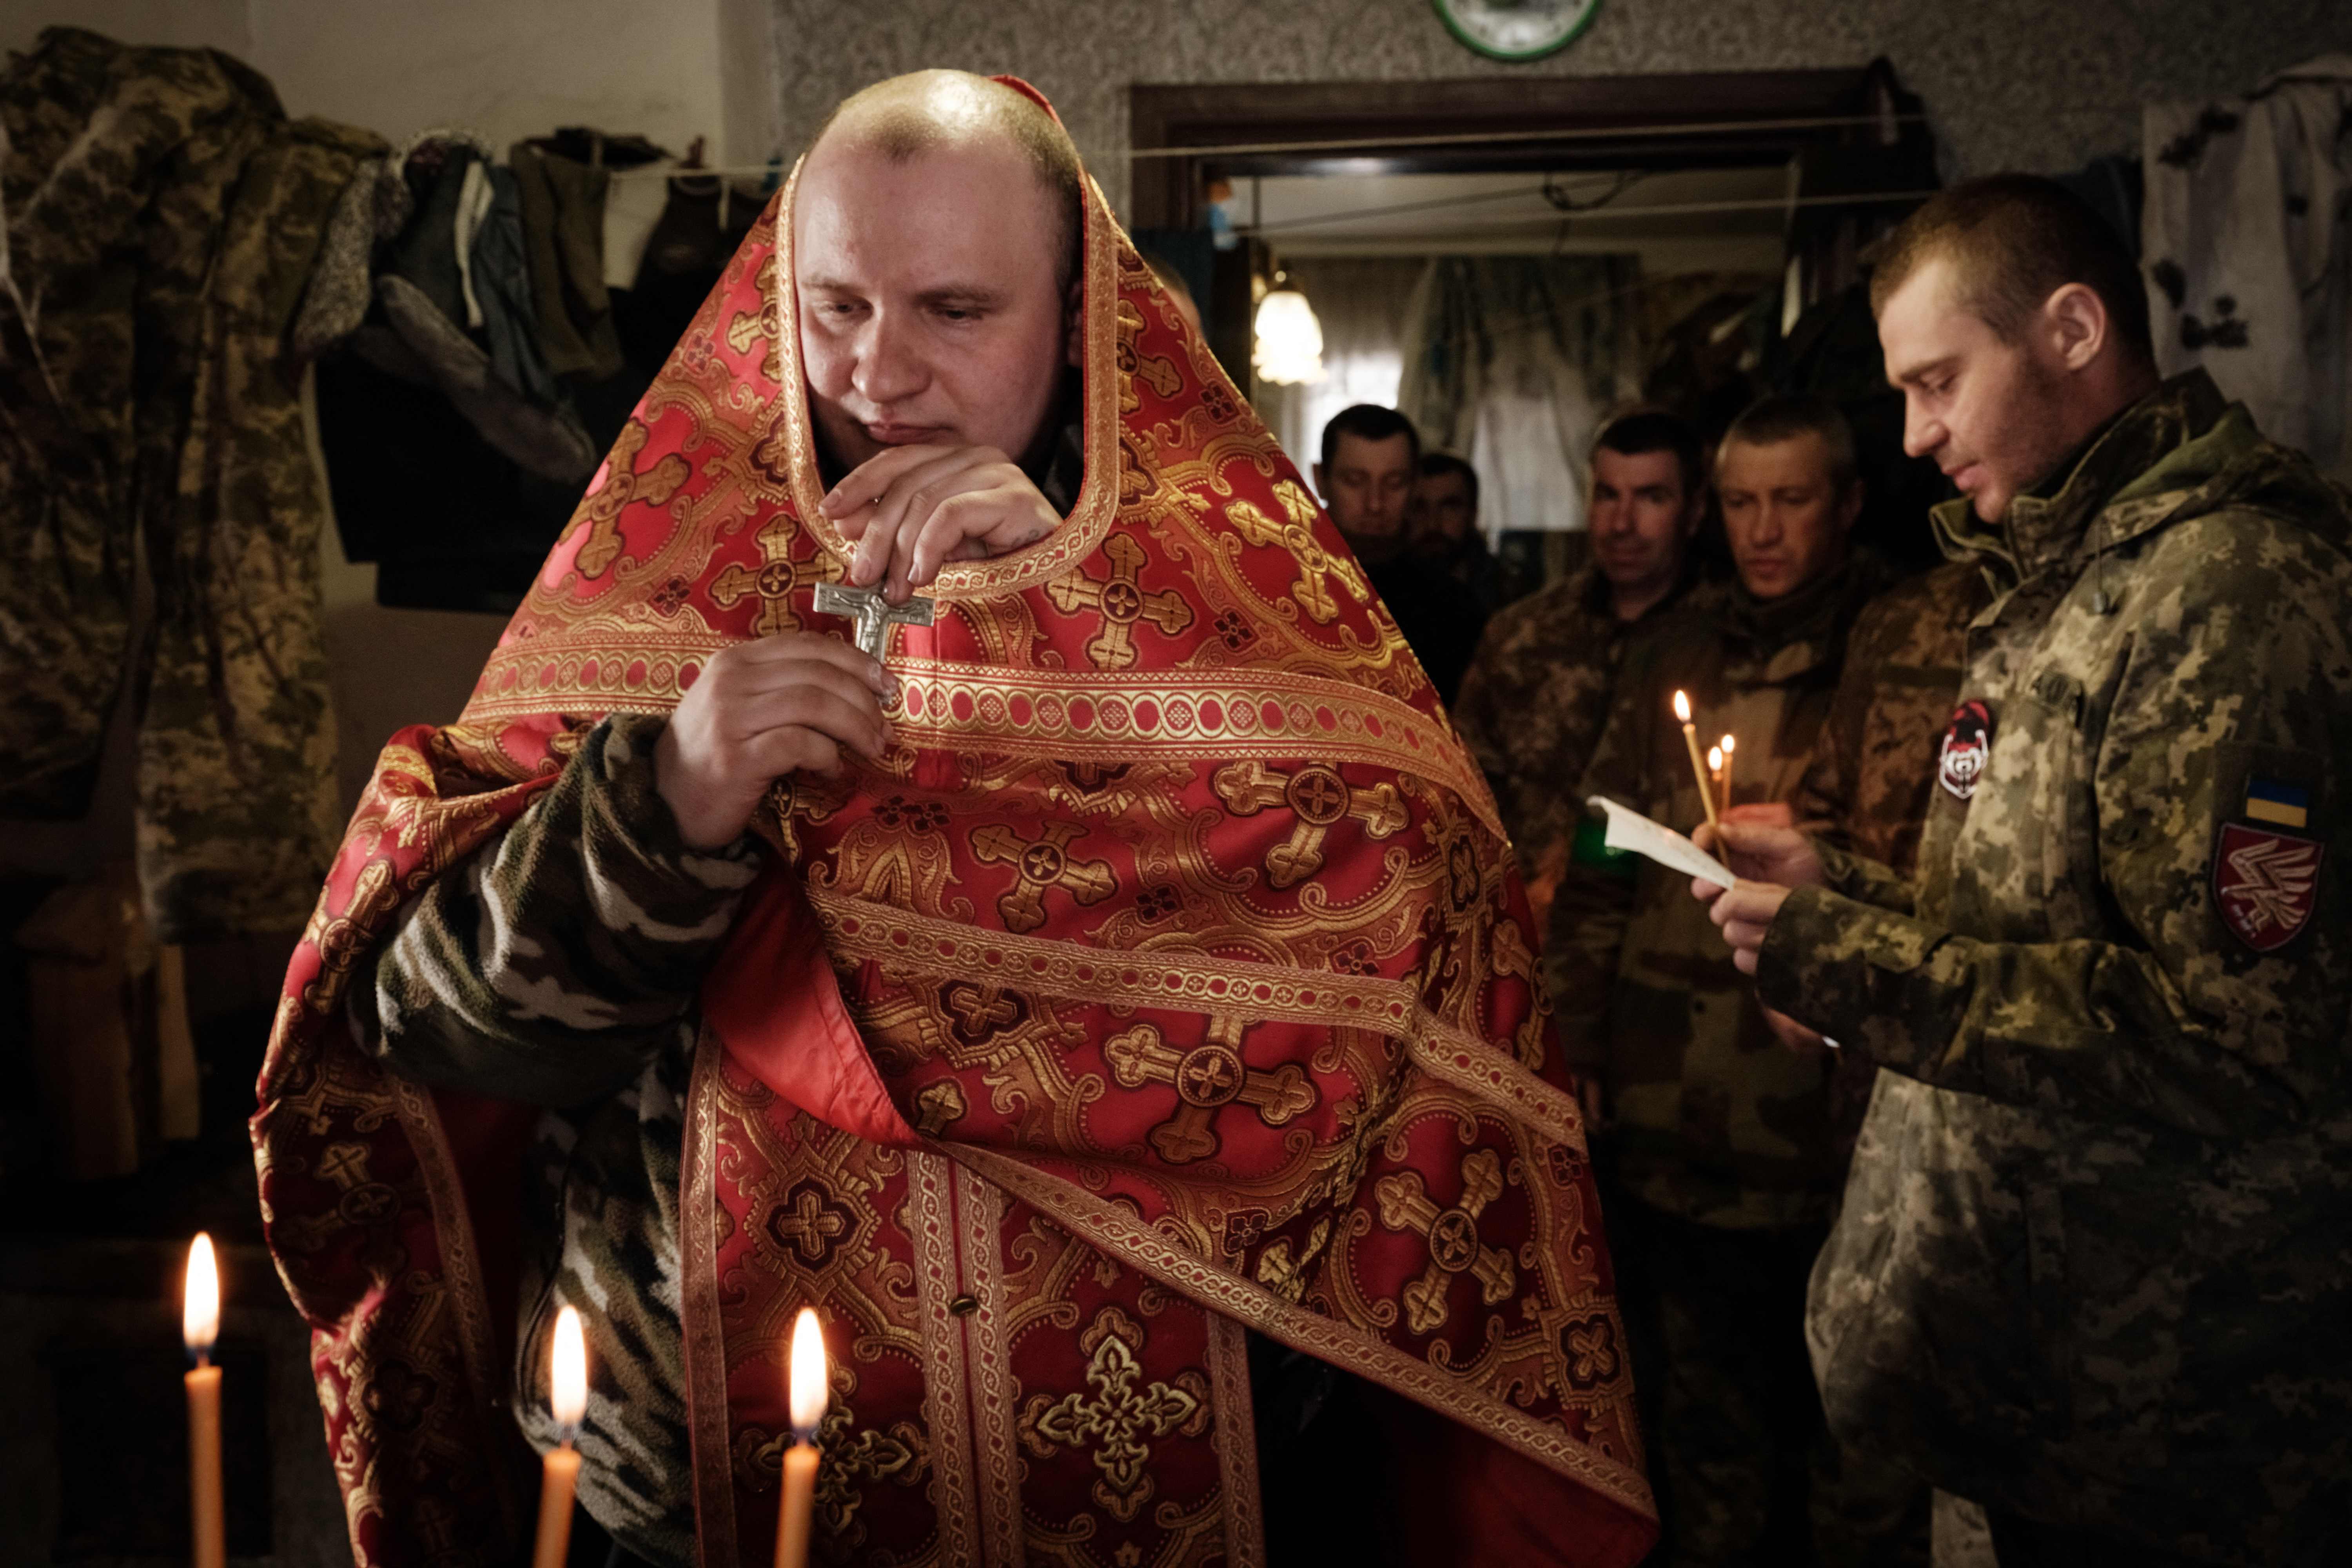 Mykola Berezyk (R), 28-year-old, chaplain to the Ukrainian Army?s 95th Air Assault Brigade, also known as “Father Mykola?, prepares to conduct a prayer for Ukrainian servicemen who returned from the frontline in the Donetsk region on February 22, 2023, amid the Russian invasion of Ukraine. (Photo by YASUYOSHI CHIBA / AFP)